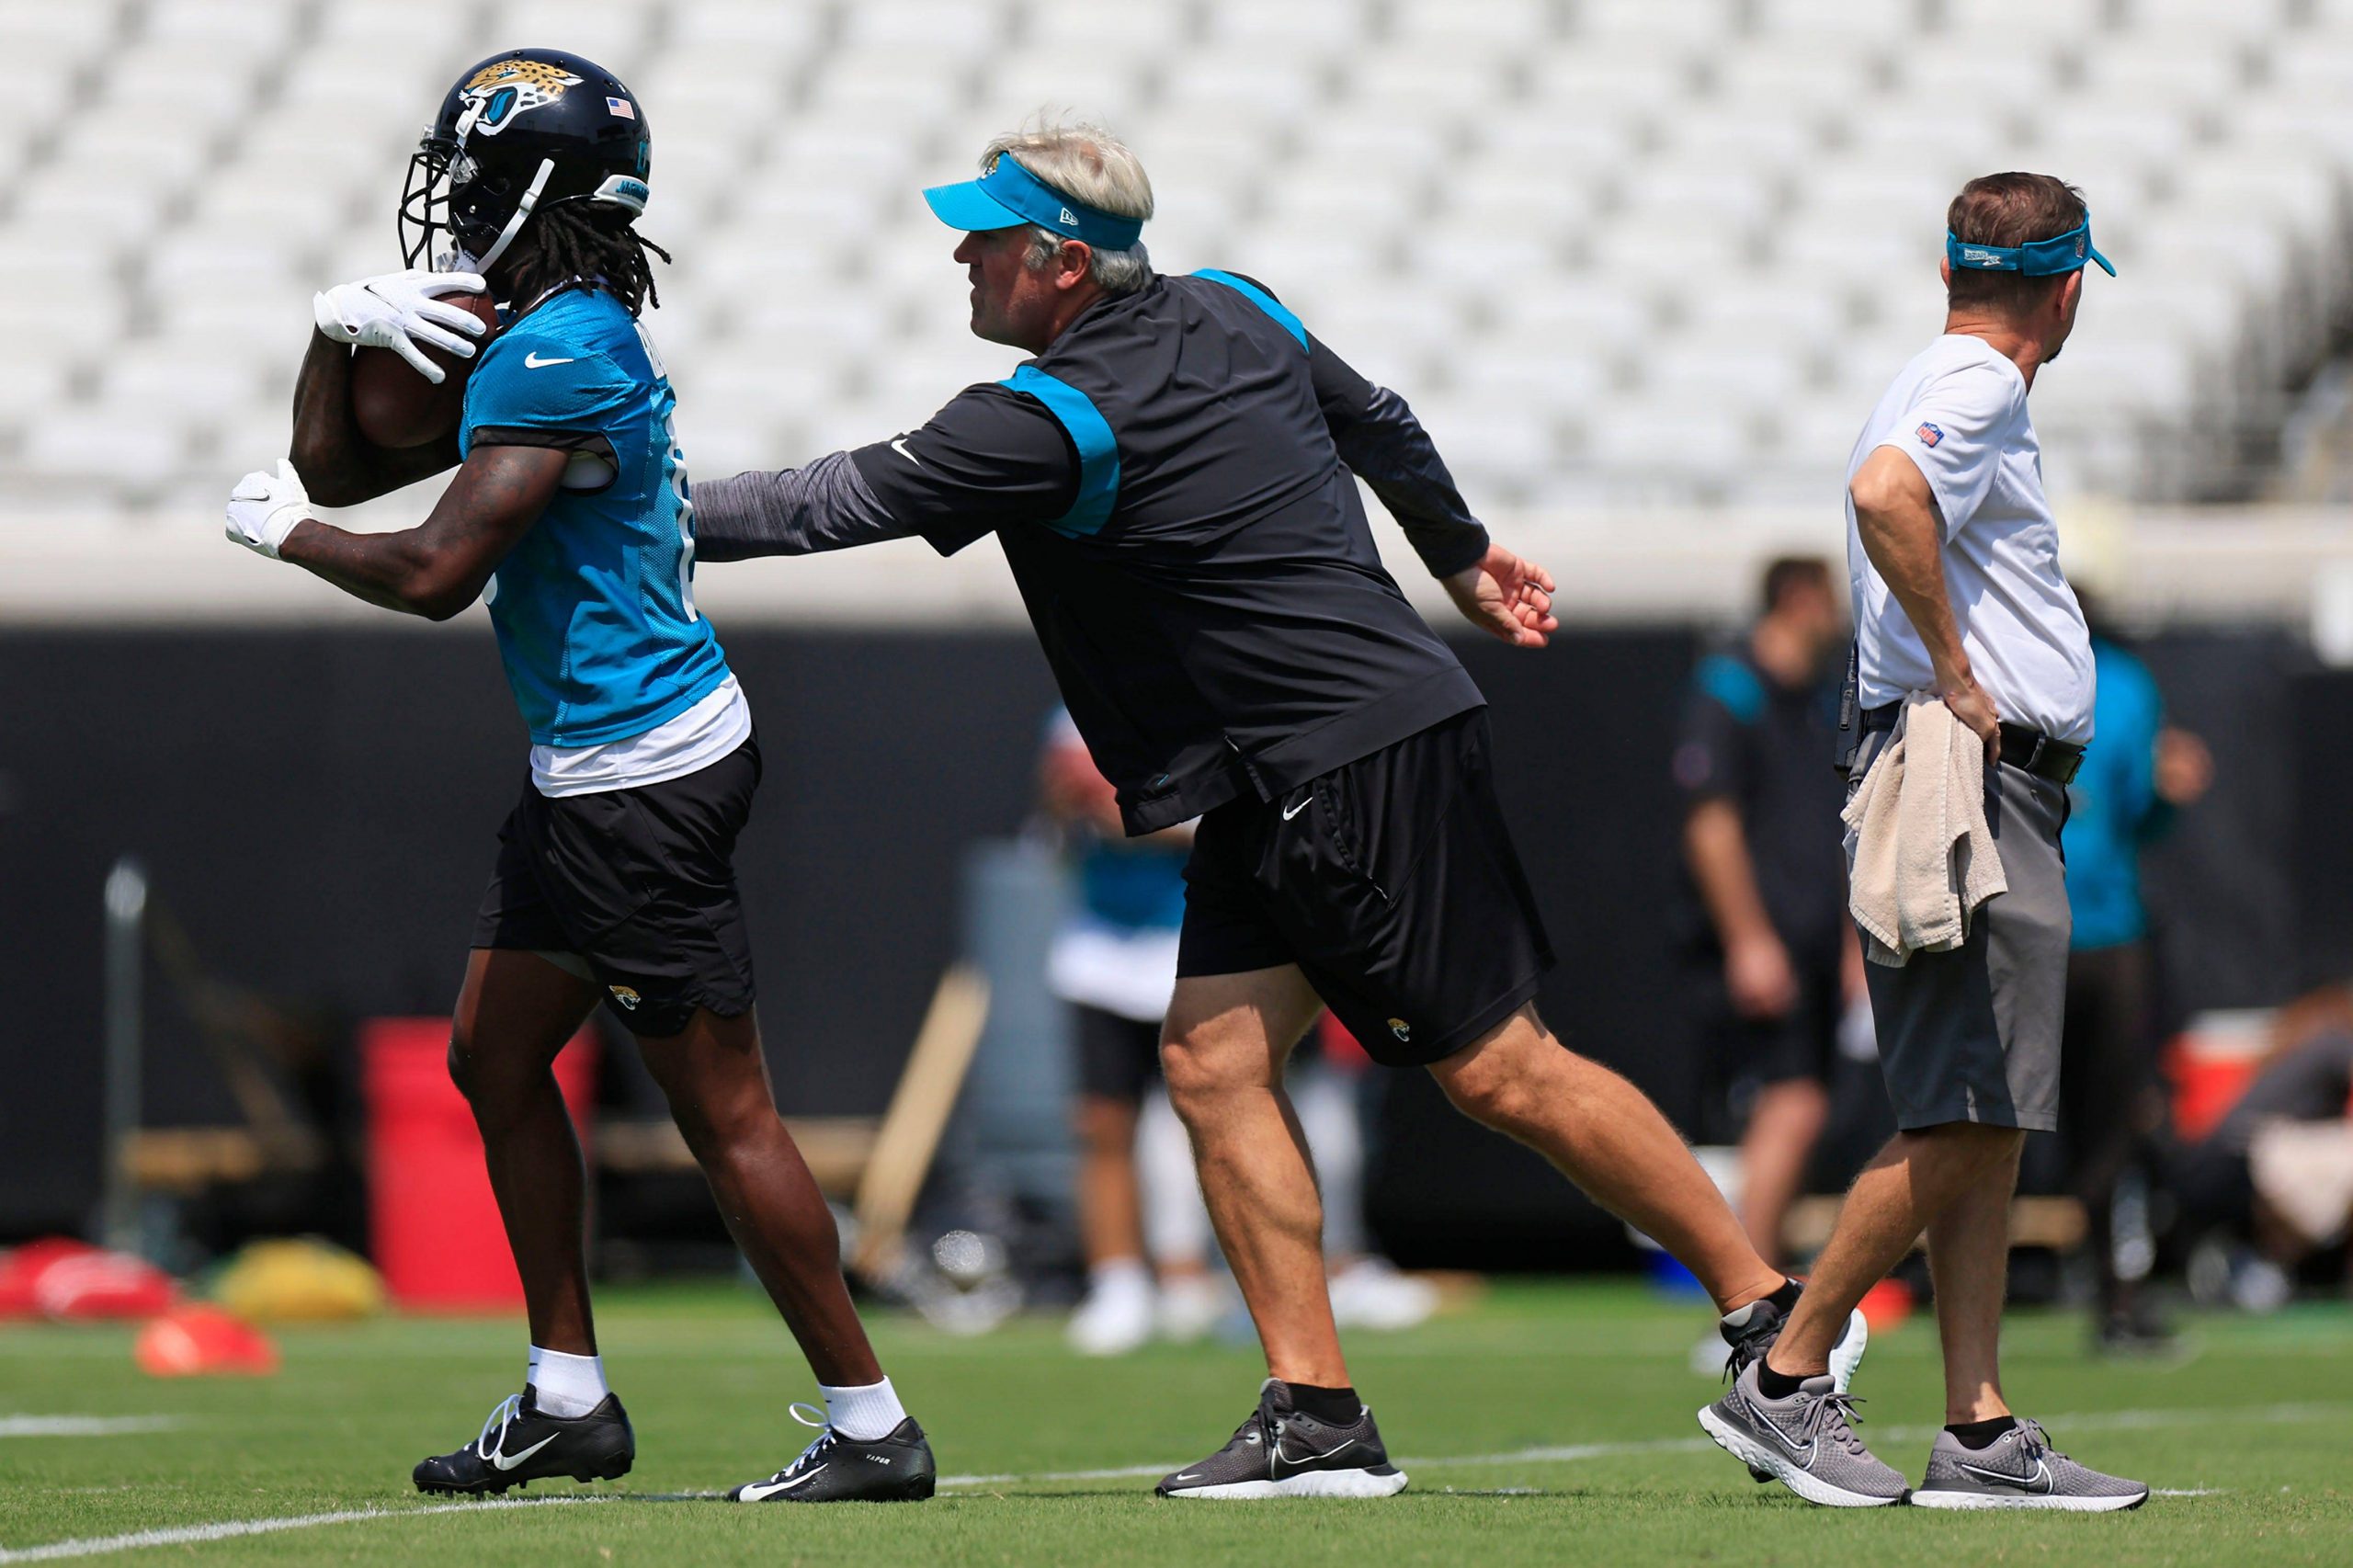 Syndication: Florida Times-Union Jacksonville Jaguars head coach Doug Pederson tries to knock the ball from wide receiver Calvin Ridley 0 during an organized team activity Tuesday, May 30, 2023 at TIAA Bank Field in Jacksonville, Fla. , EDITORIAL USE ONLY PUBLICATIONxINxGERxSUIxAUTxONLY Copyright: xCoreyxPerrine/FloridaxTimes-Unionx 20786838